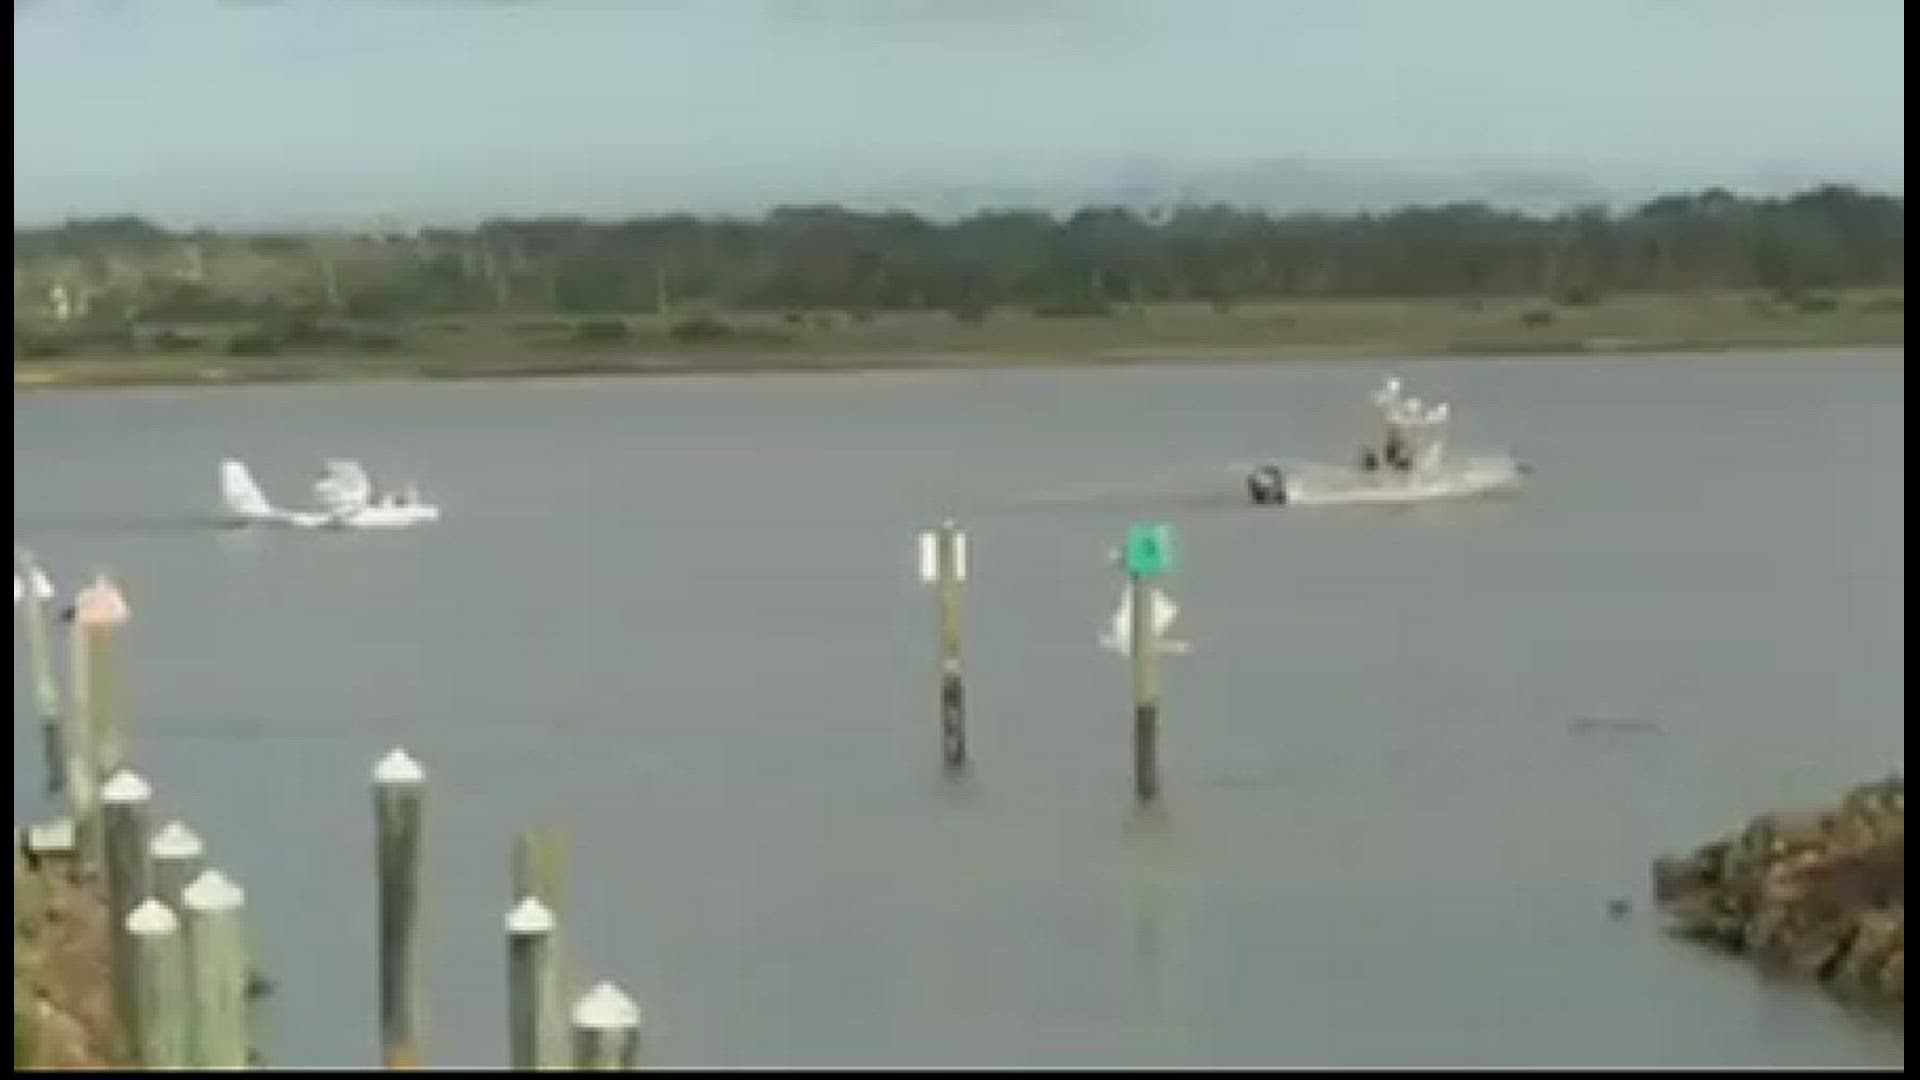 A good Samaritan helped tow a downed plane in St. Augustine to keep it from sinking.